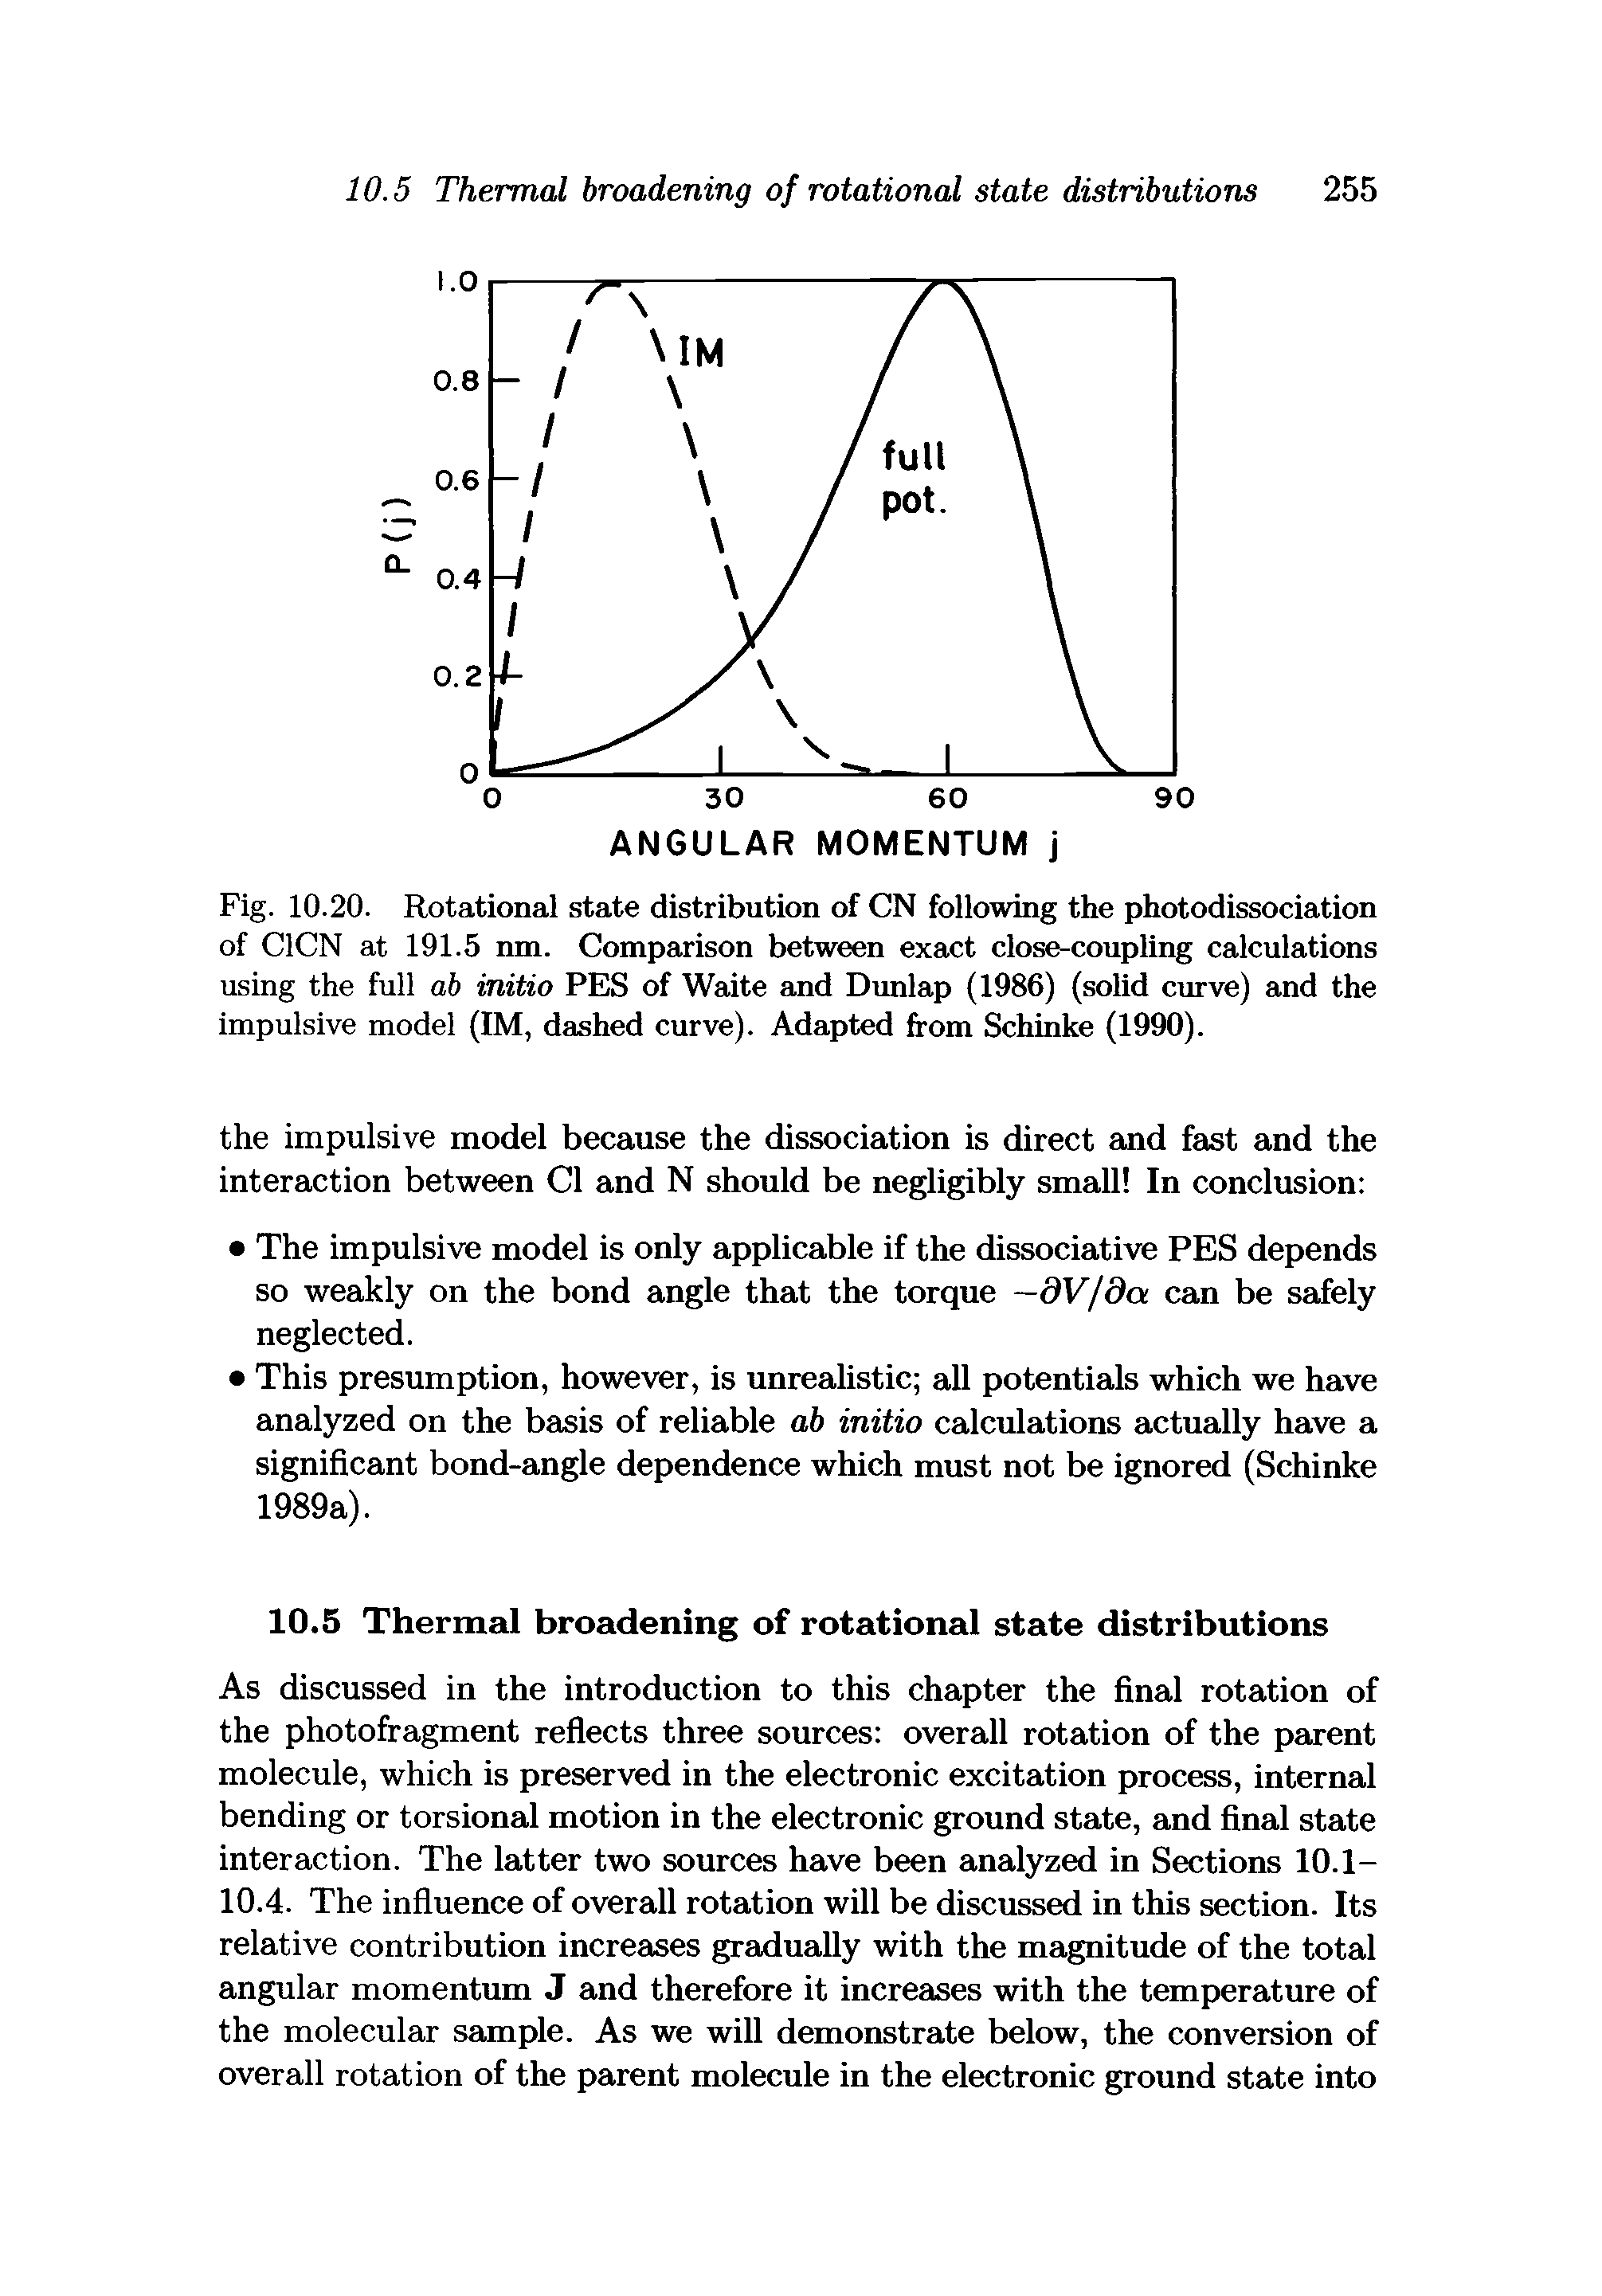 Fig. 10.20. Rotational state distribution of CN following the photodissociation of C1CN at 191.5 nm. Comparison between exact close-coupling calculations using the full ab initio PES of Waite and Dunlap (1986) (solid curve) and the impulsive model (IM, dashed curve). Adapted from Schinke (1990).